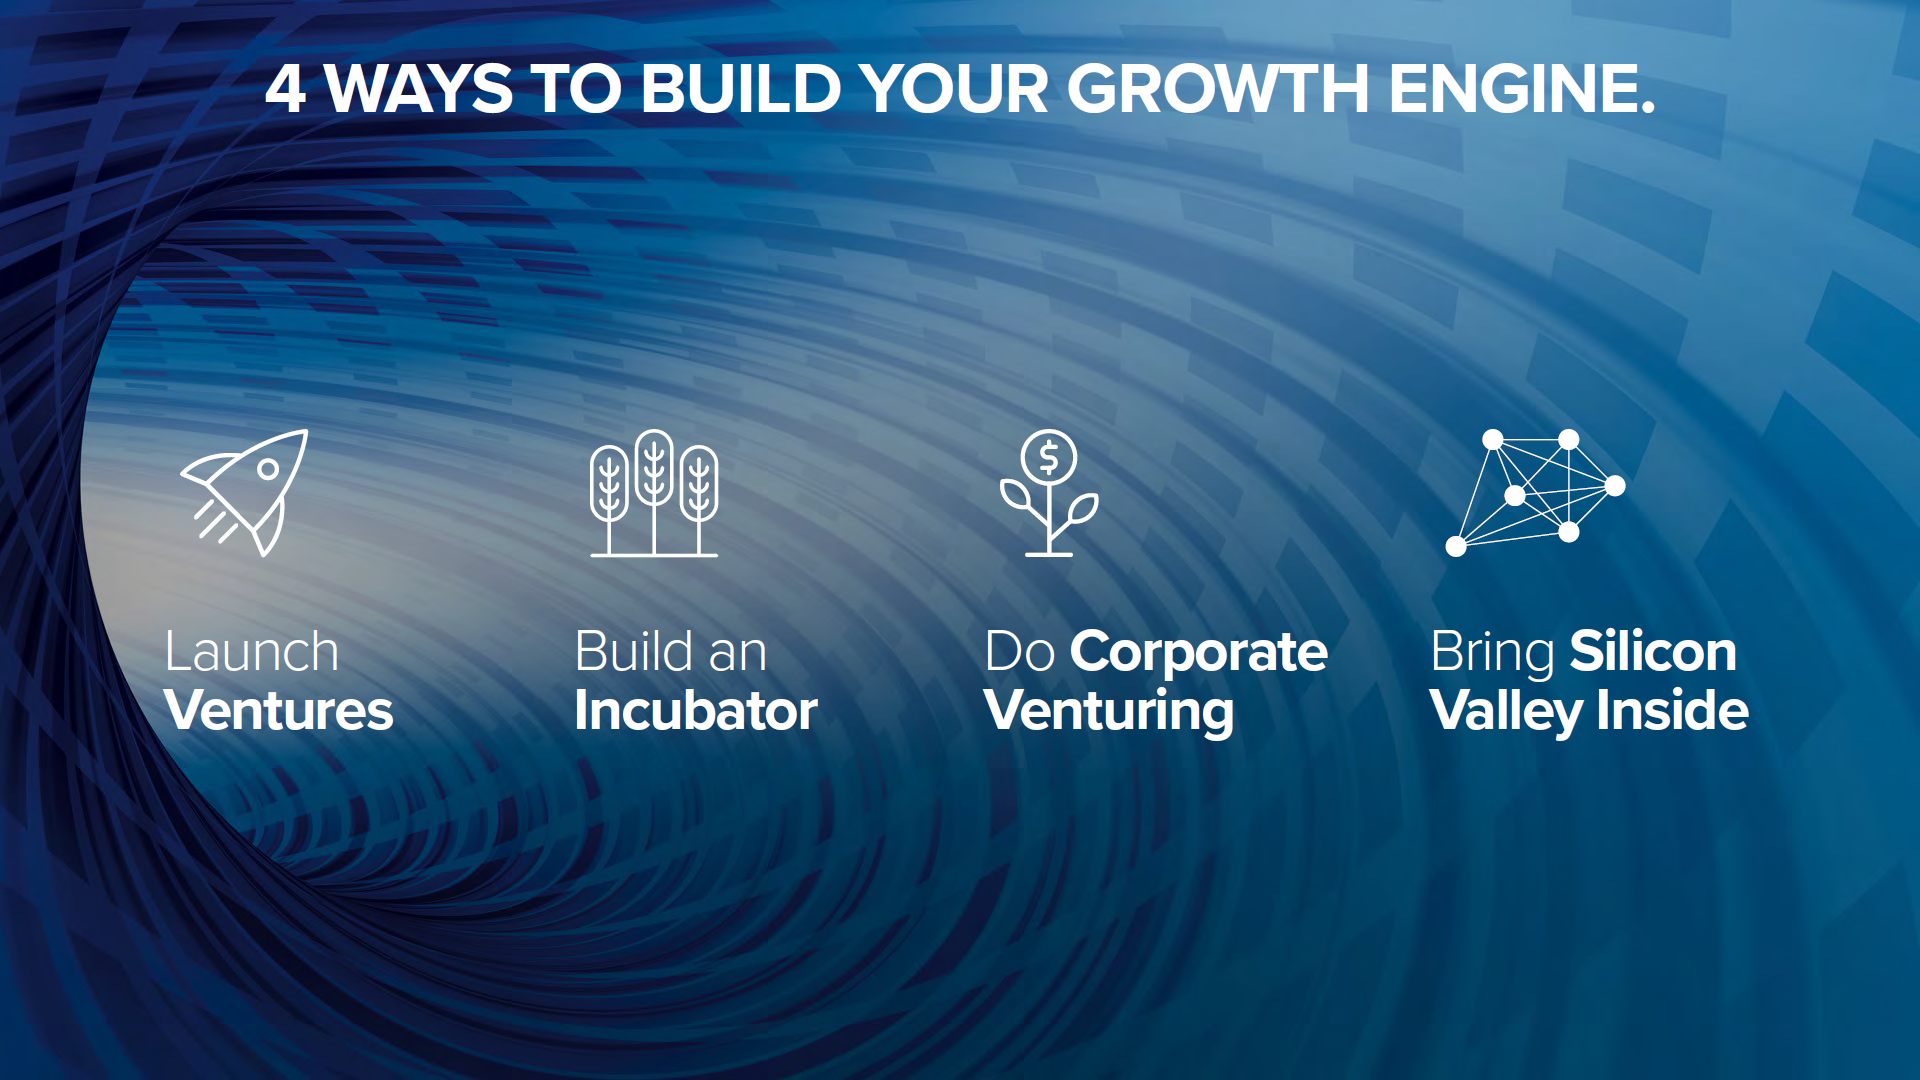 4 ways to build your growth engine